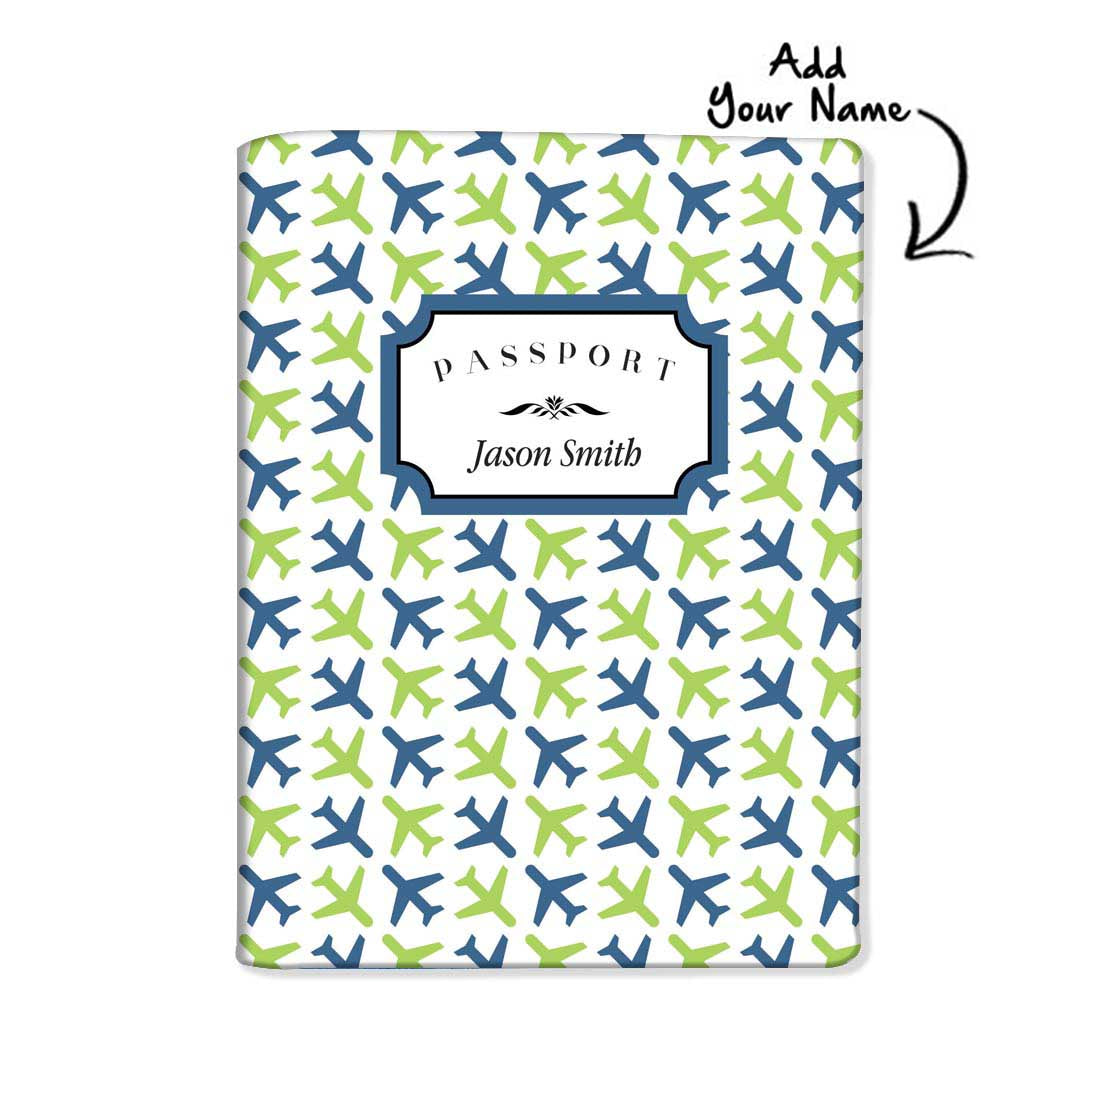 New Personalized Passport Cover - Planes